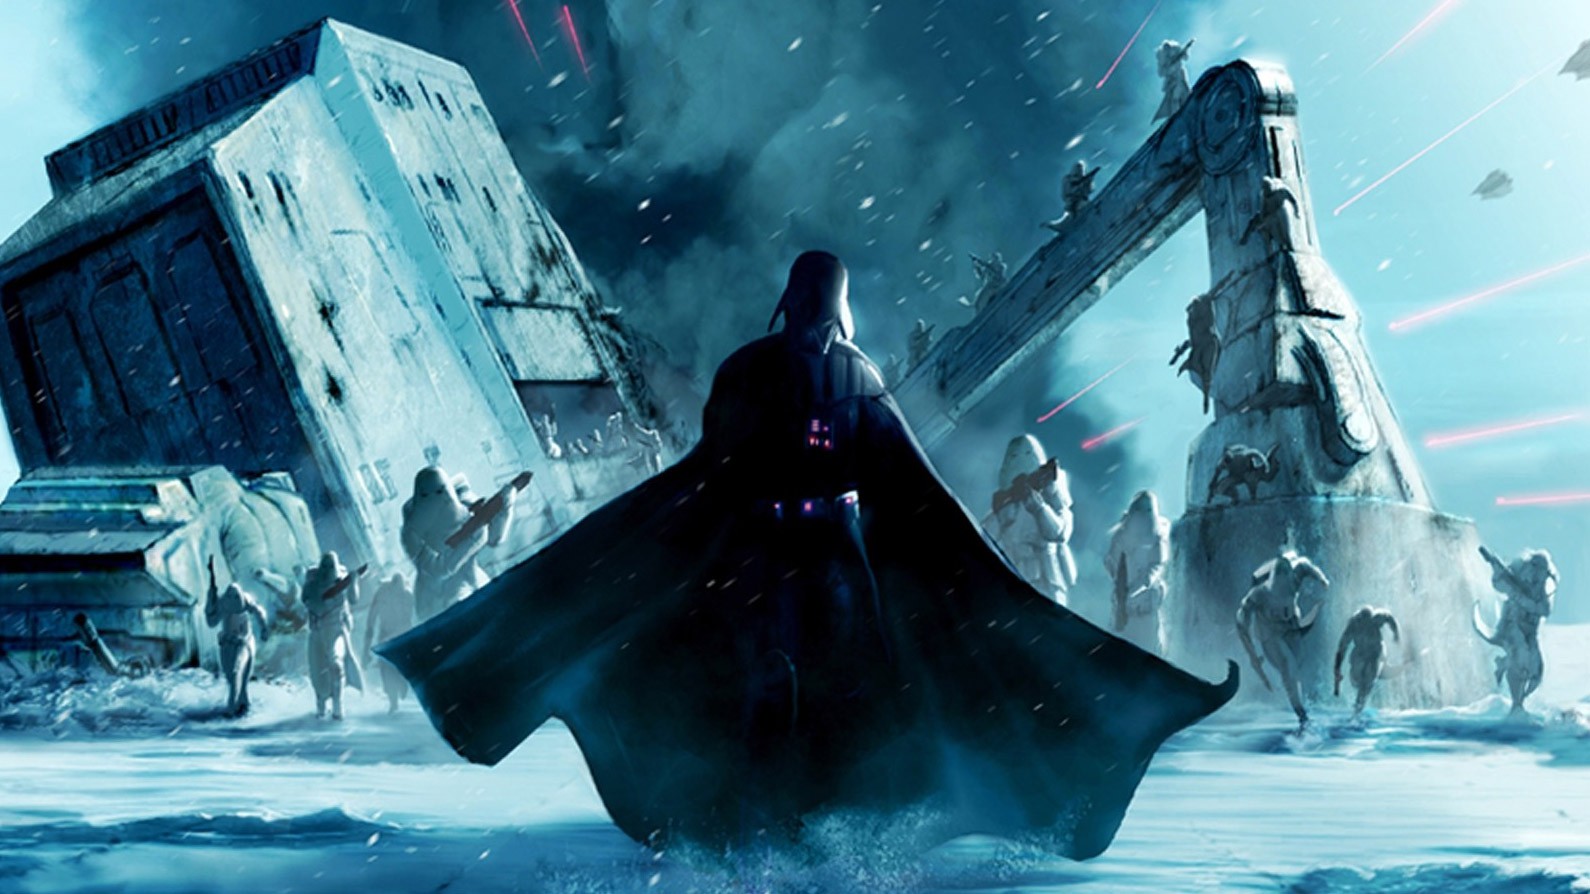 Star Wars Darth Vader Imperial Forces Sith Snow Artwork 1590x894